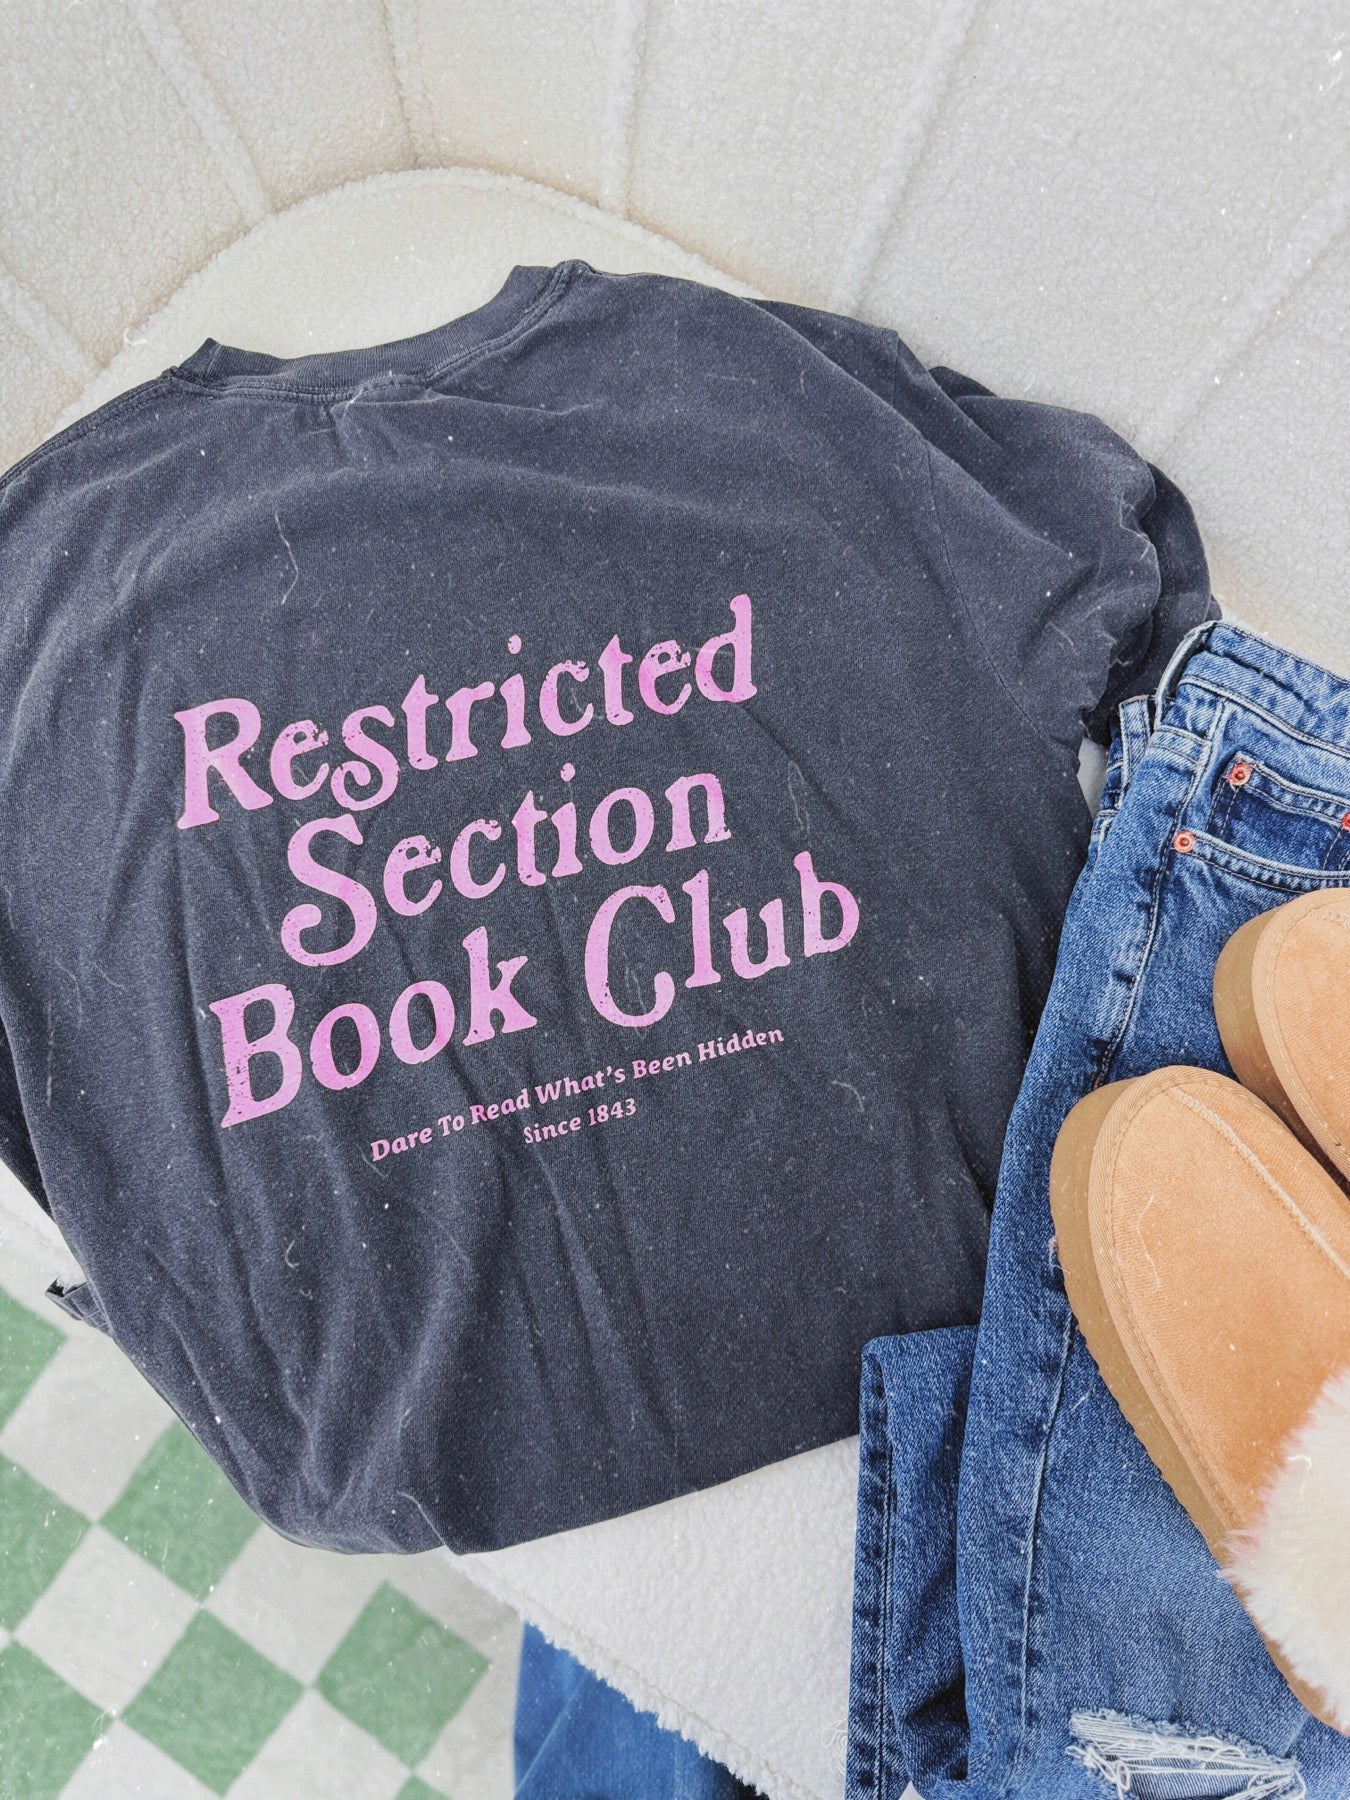 Restricted Section Book Club Tee